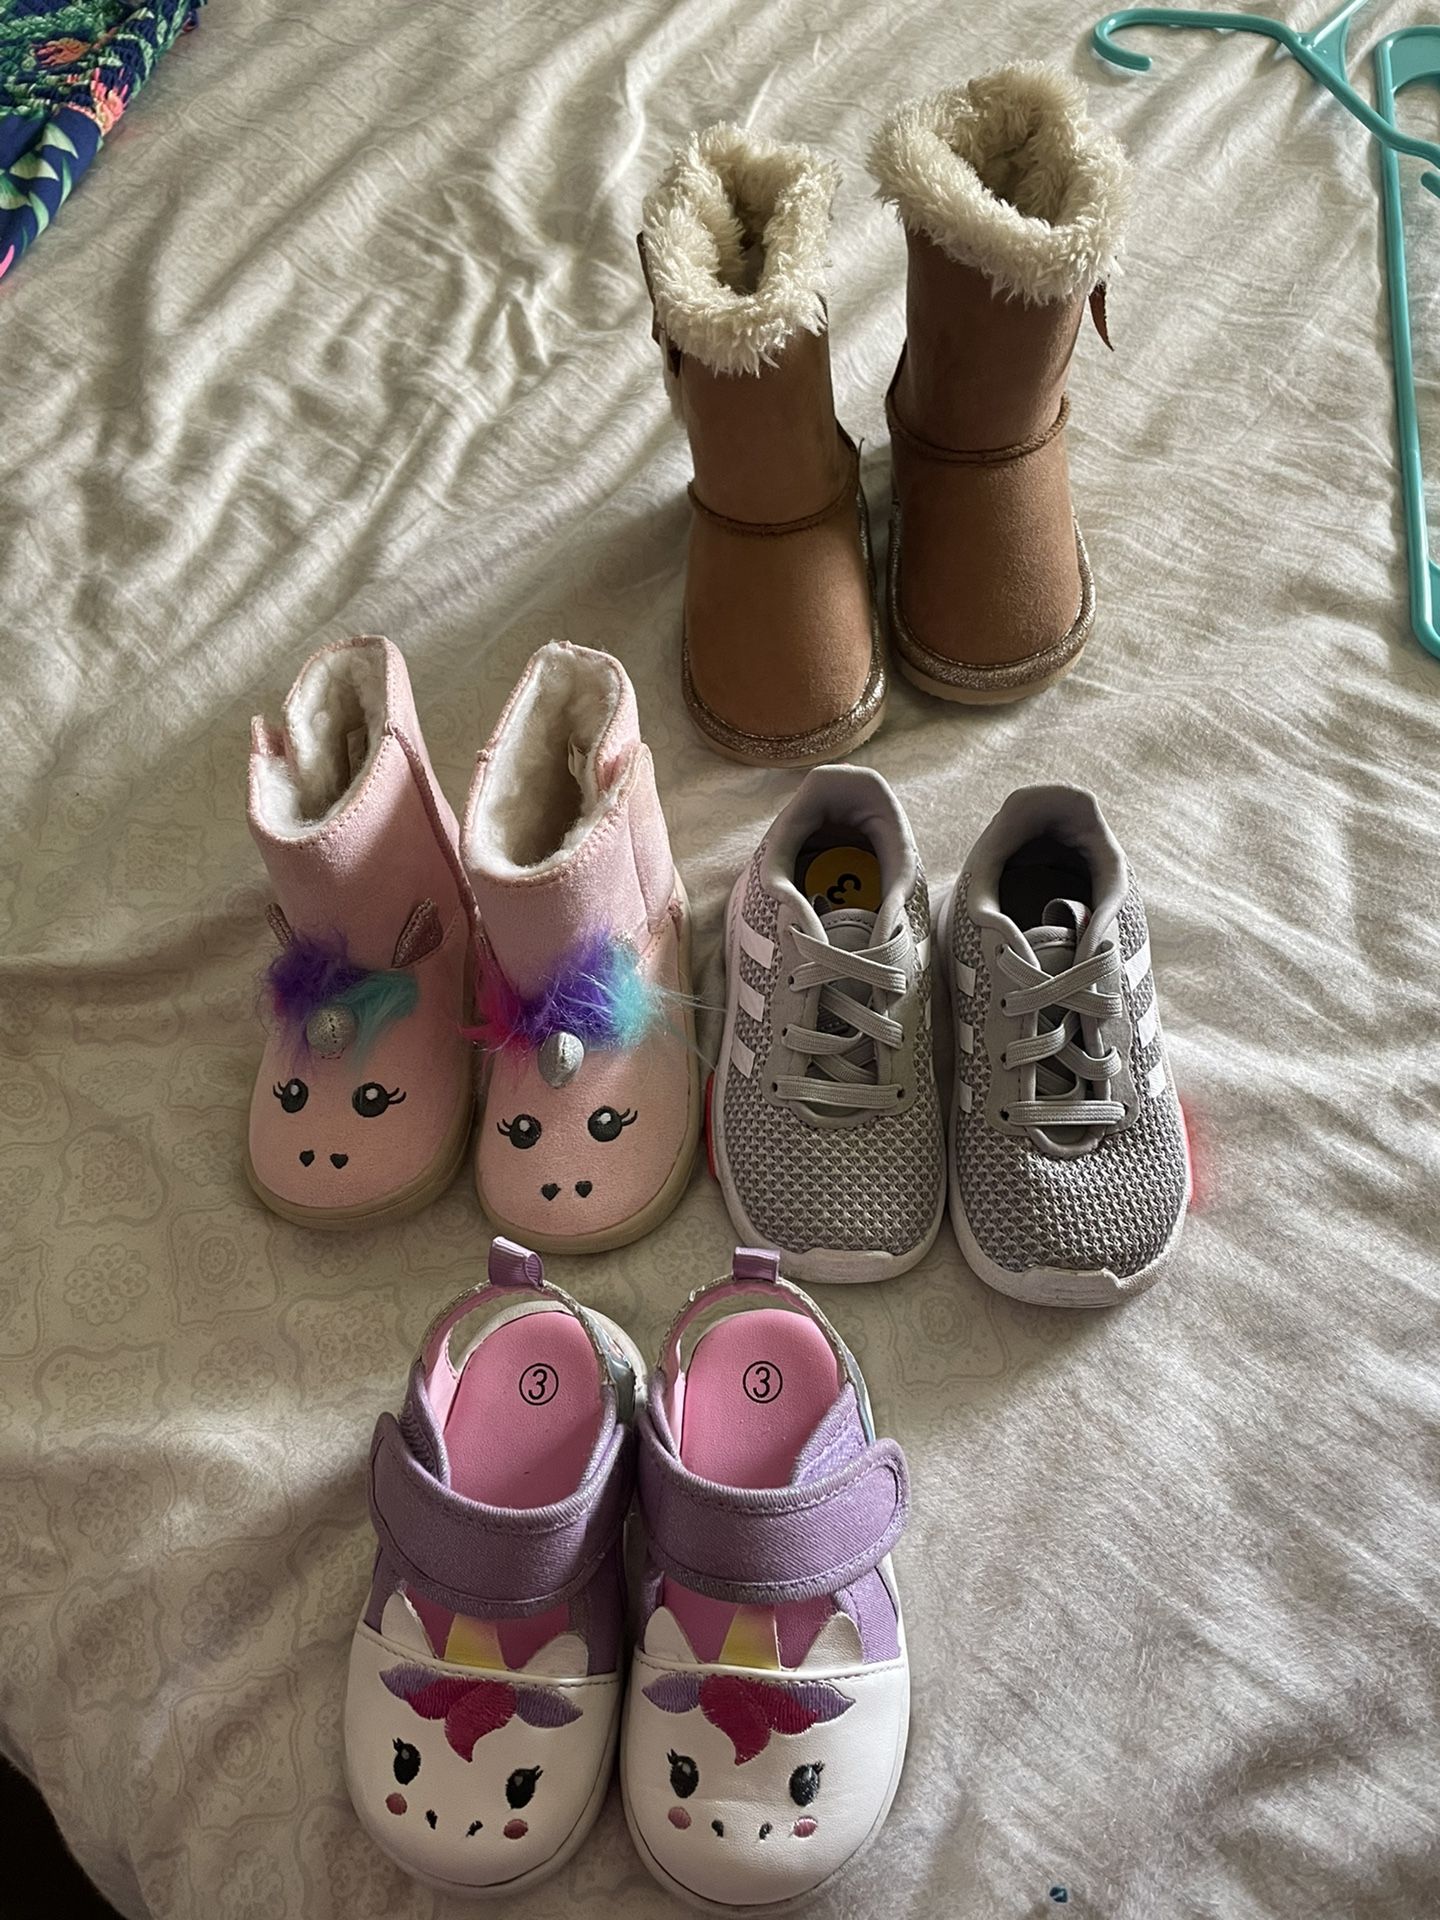 Toddler Shoes For Girls Size 3 $30 For All